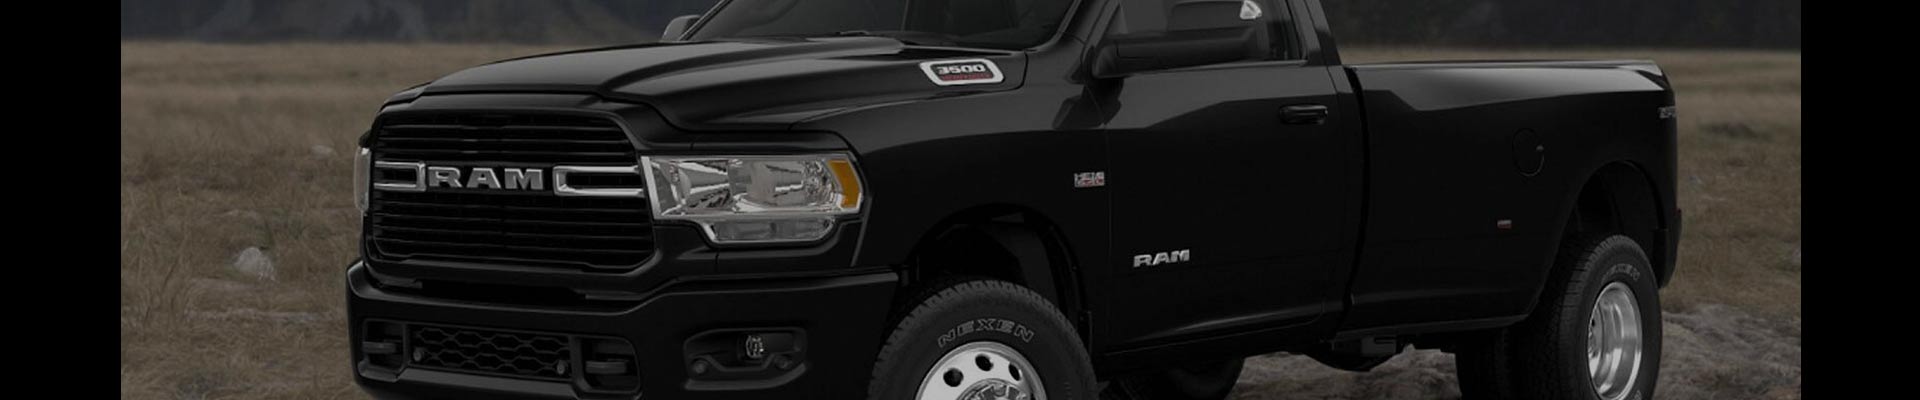 Shop Replacement and OEM Ram 3500 Parts with Discounted Price on the Net